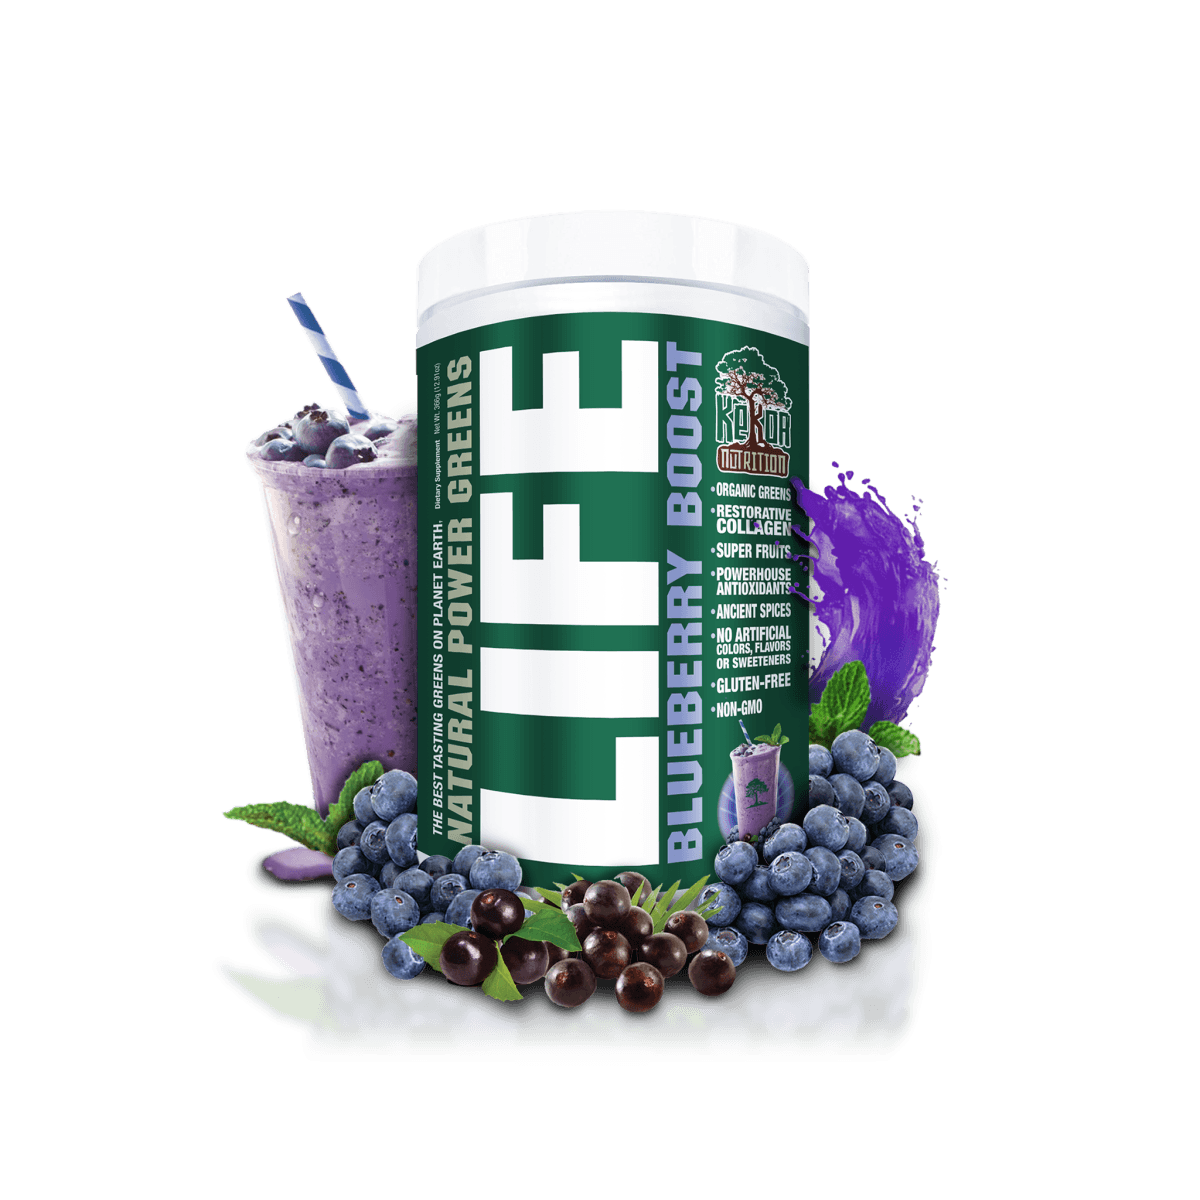 LIFE Natural Power Greens - Blueberry